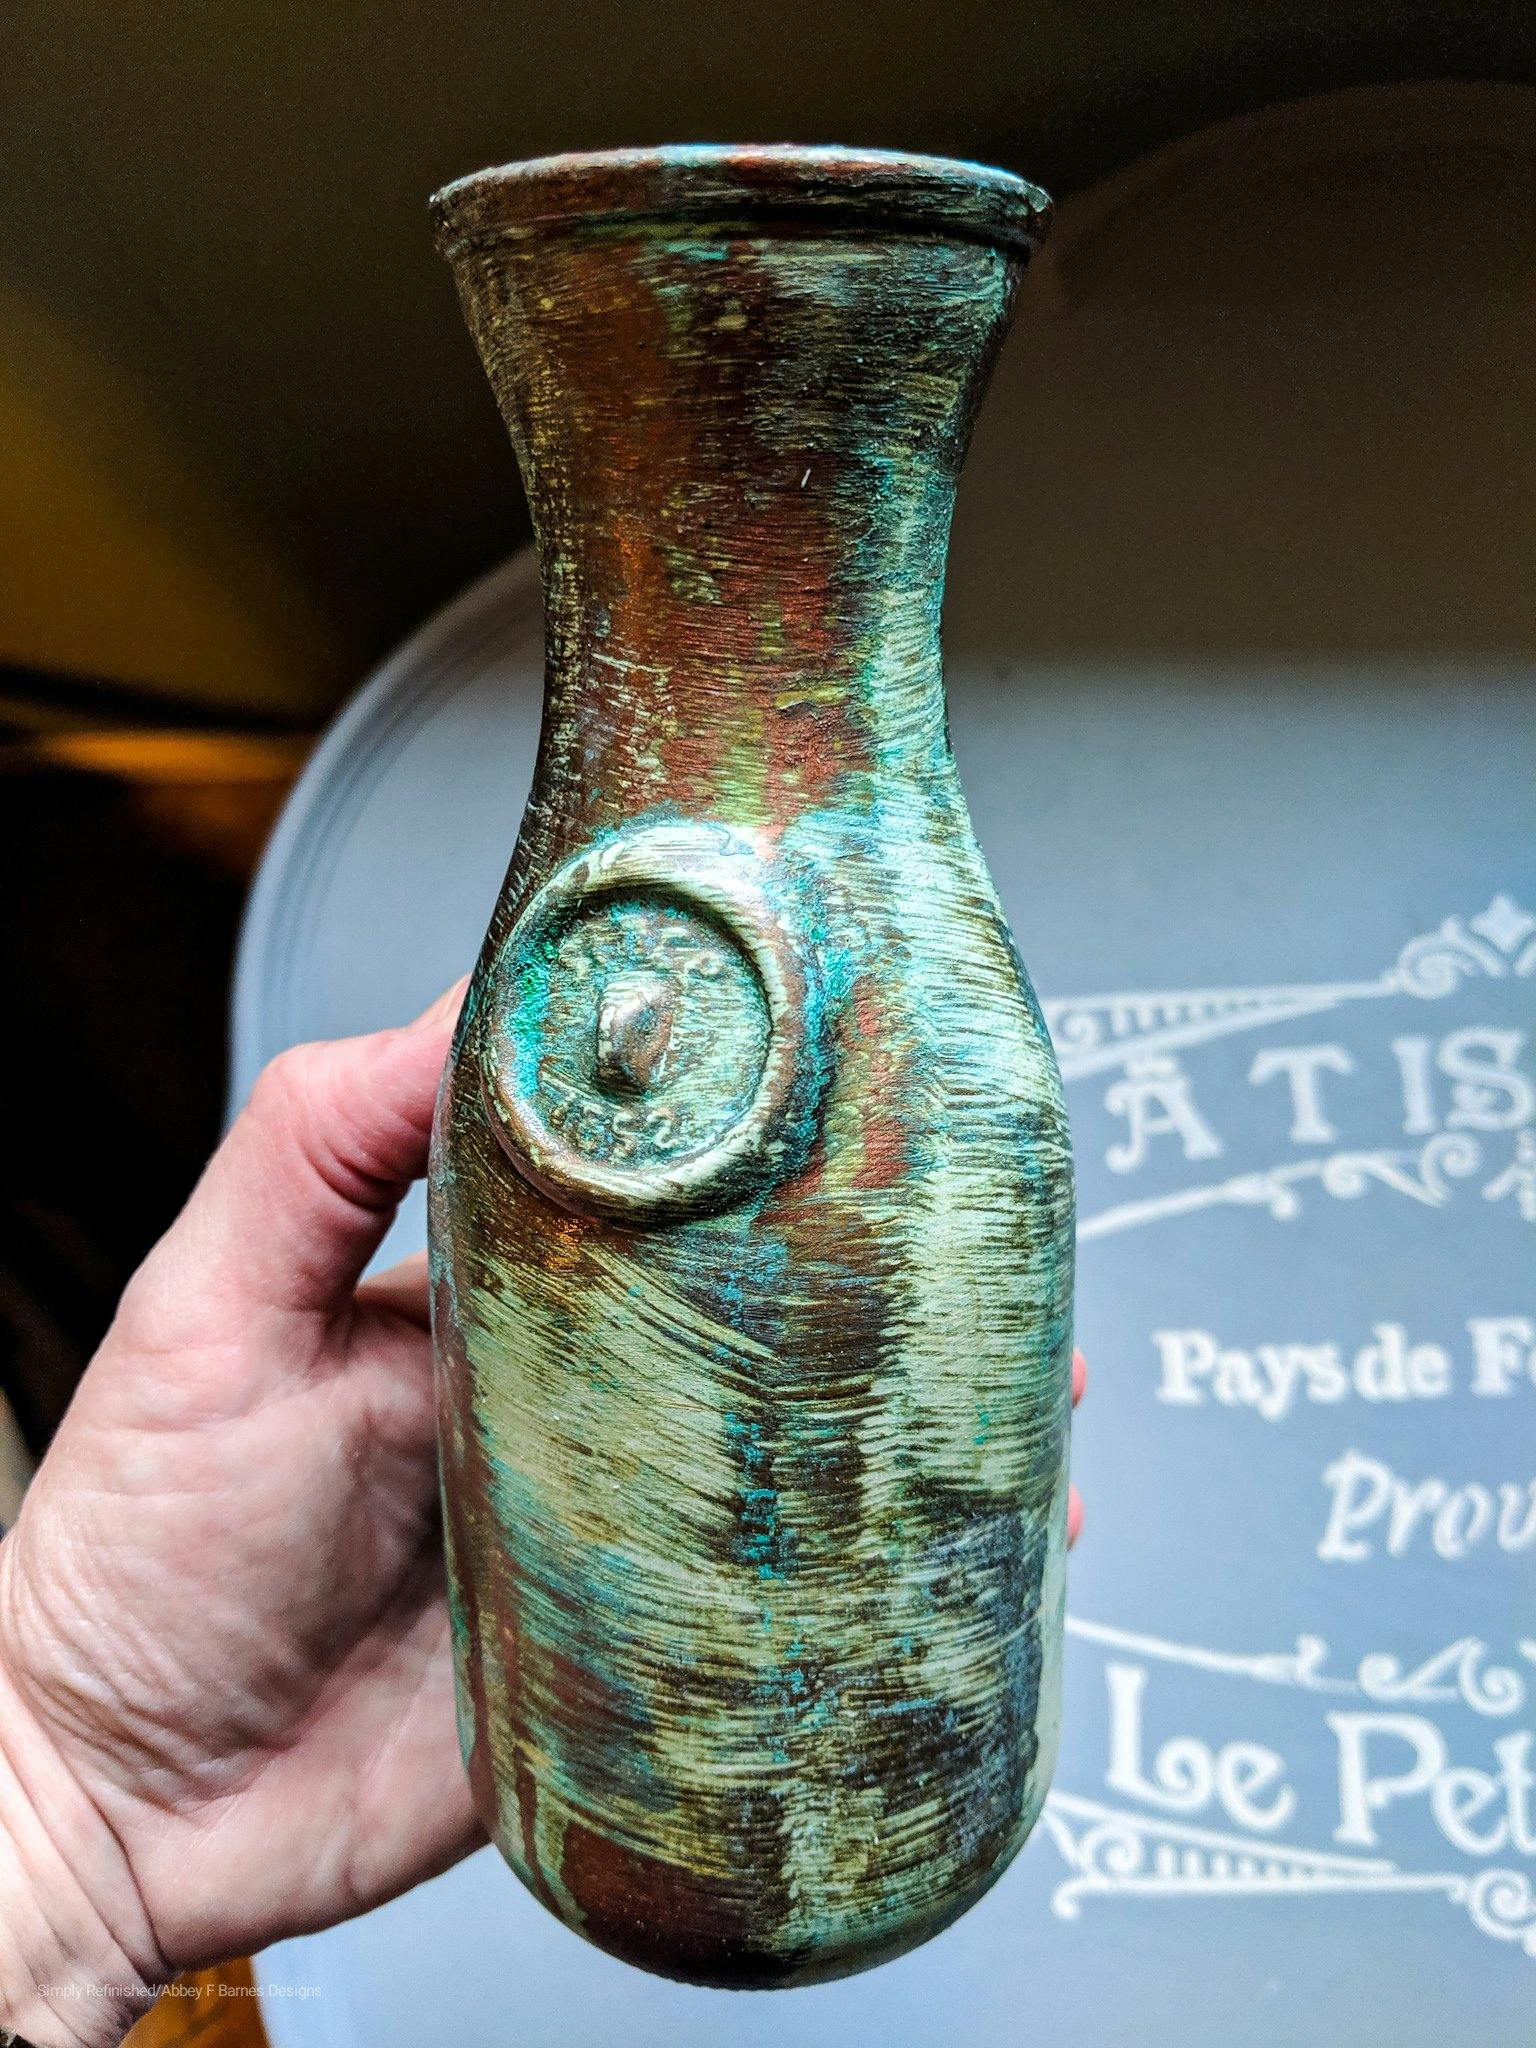 Patina - What is it, How is it Made, and Where Does it Develop?